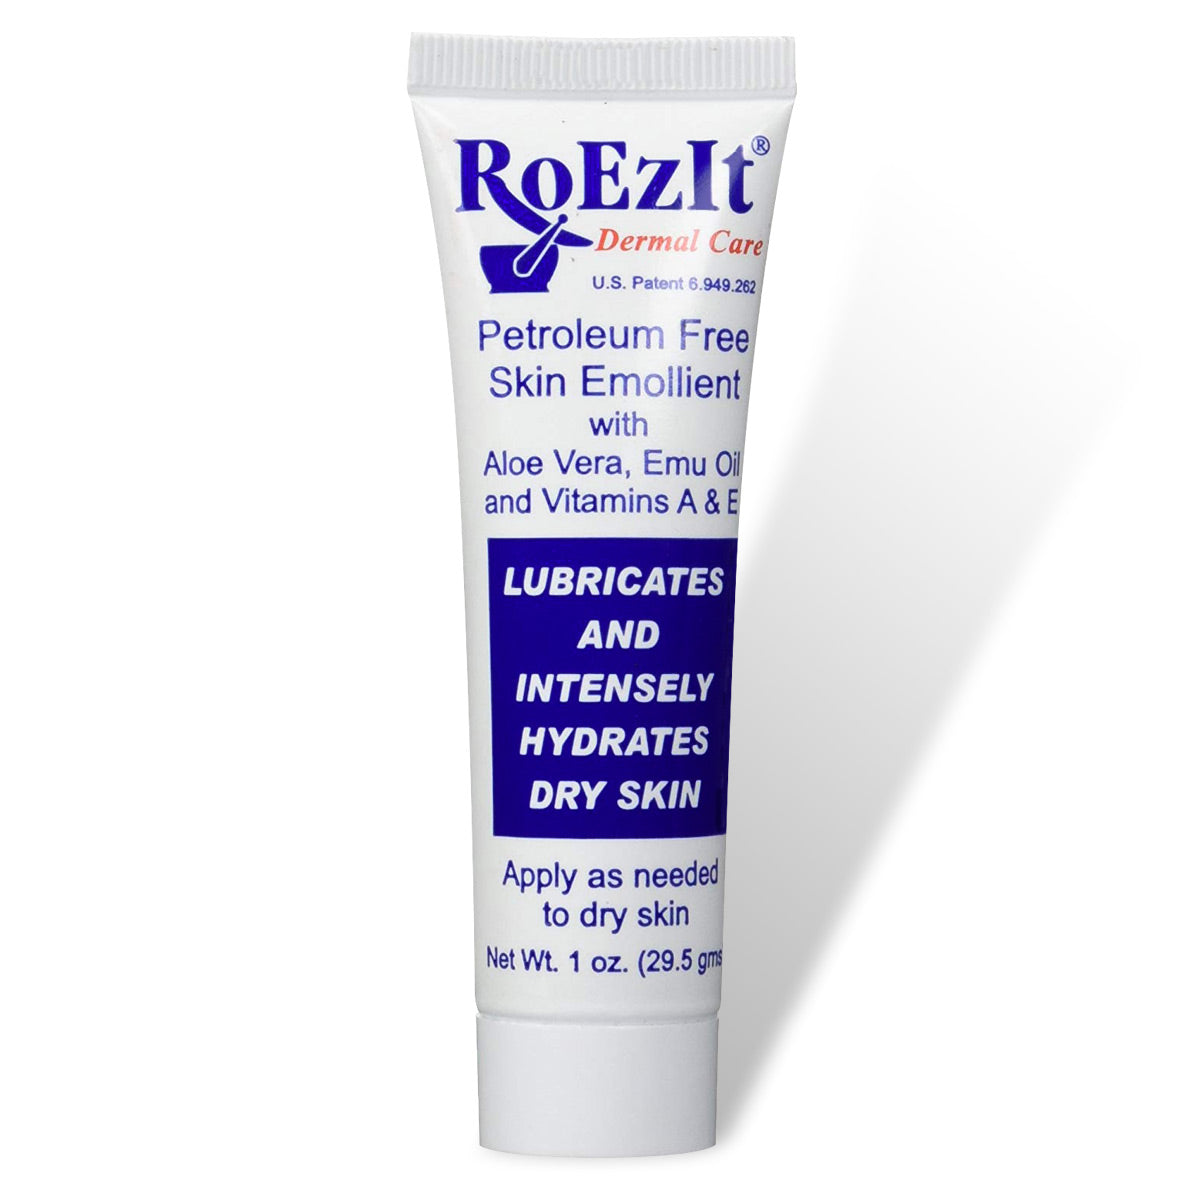 RoEzIt Dermal Care Petroleum Free Skin Emollient for CPAP & Oxygen Therapy (1 Oz Tube)